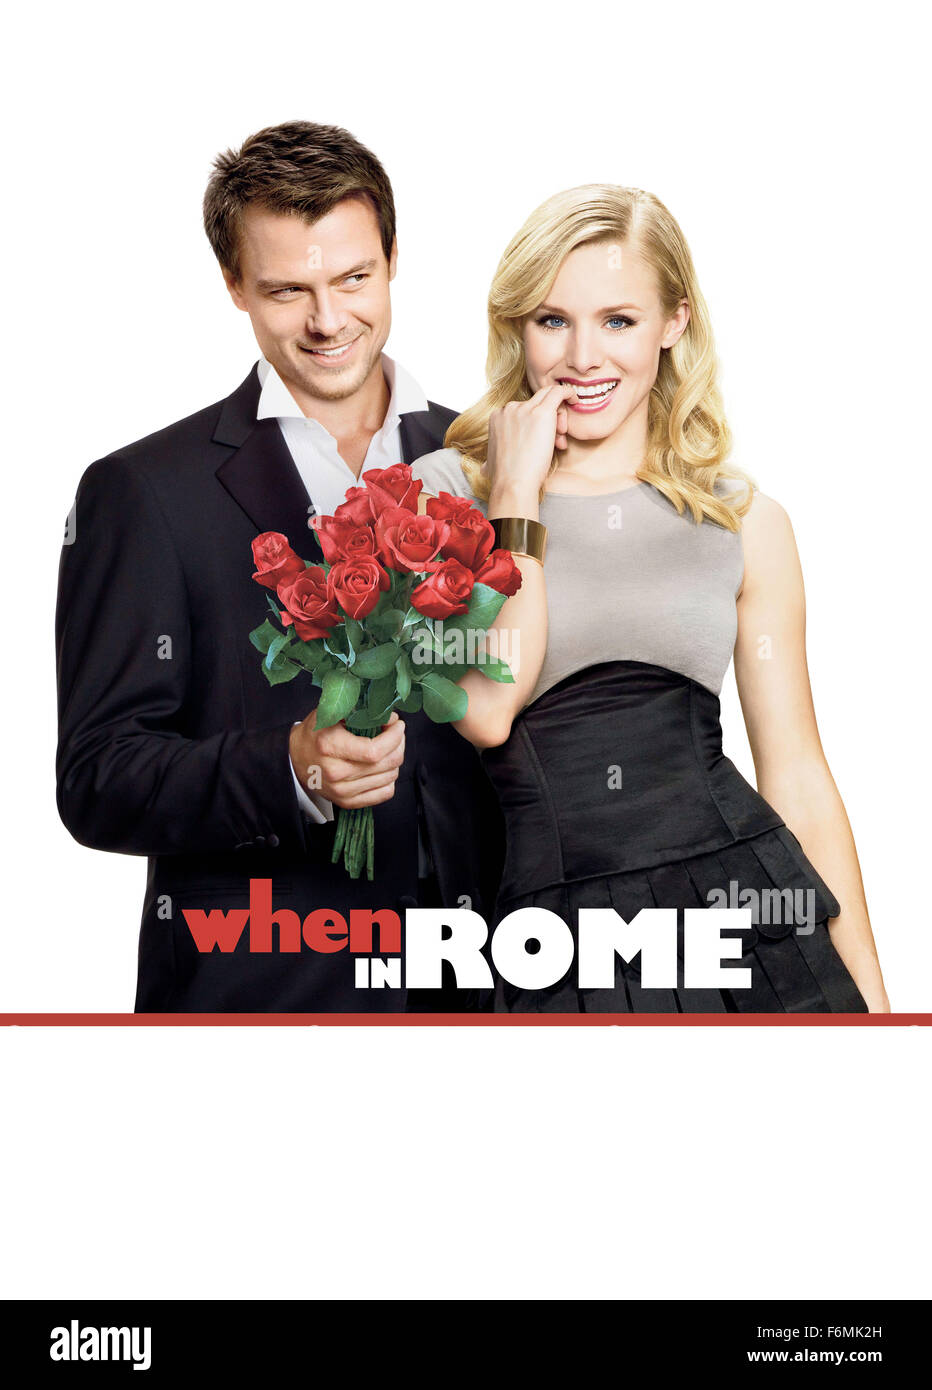 RELEASE DATE: January 29, 2010  MOVIE TITLE: When in Rome  STUDIO: Touchstone Pictures  DIRECTOR: Mark Steven Johnson  PLOT: Beth is a young, ambitious New Yorker who is completely unlucky in love. However, on a whirlwind trip to Rome, she impulsively steals some coins from a reputed fountain of love, and is then aggressively pursued by a band of suitors   PICTURED: KRISTEN BELL as Beth and JOSH DUHAMEL as Nick   (Credit Image: c Touchstone Pictures/Entertainment Pictures) Stock Photo